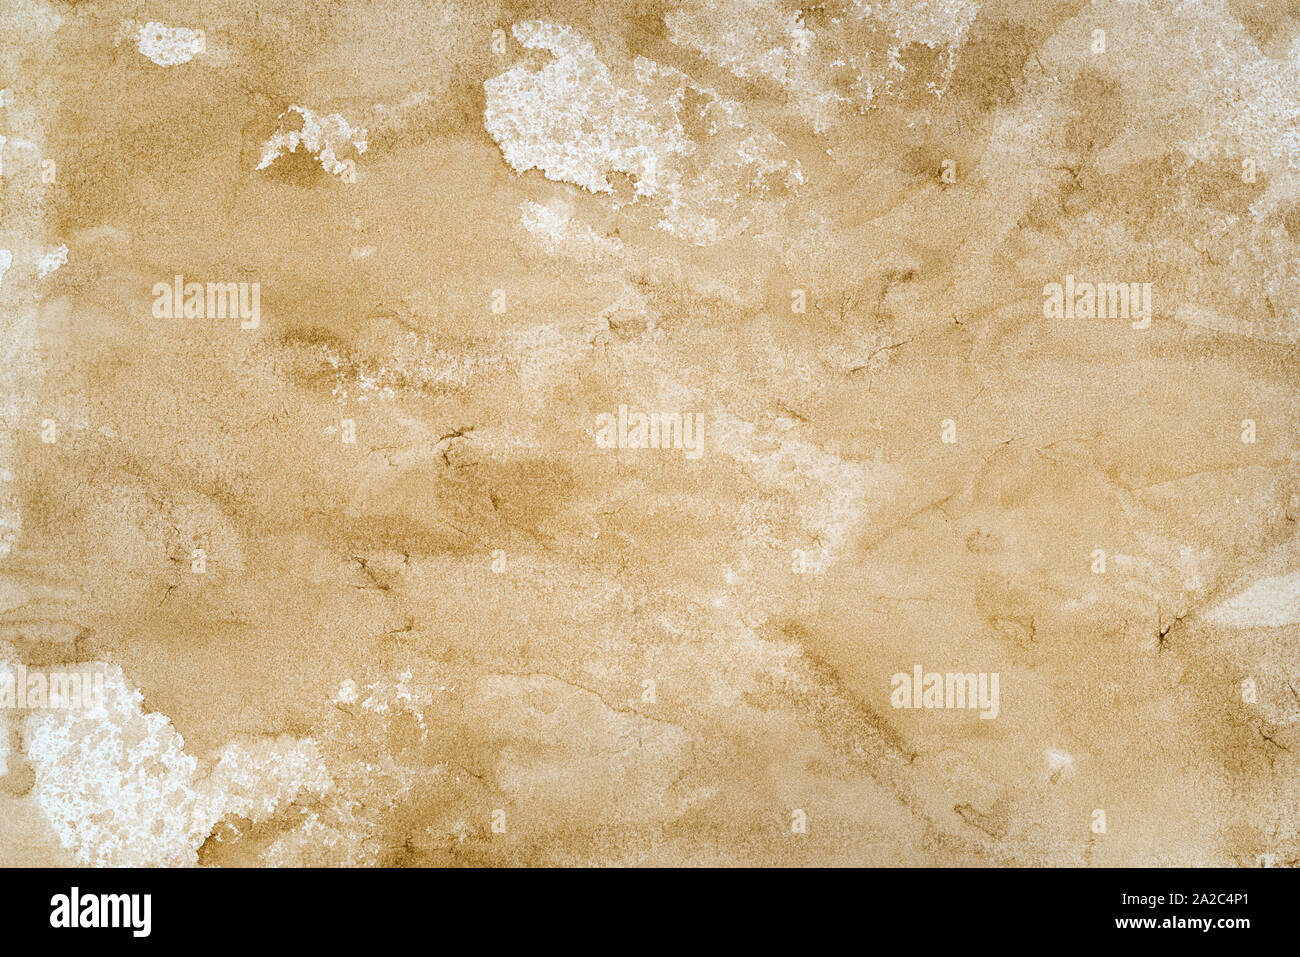 Old dirty paper background Stock Photo